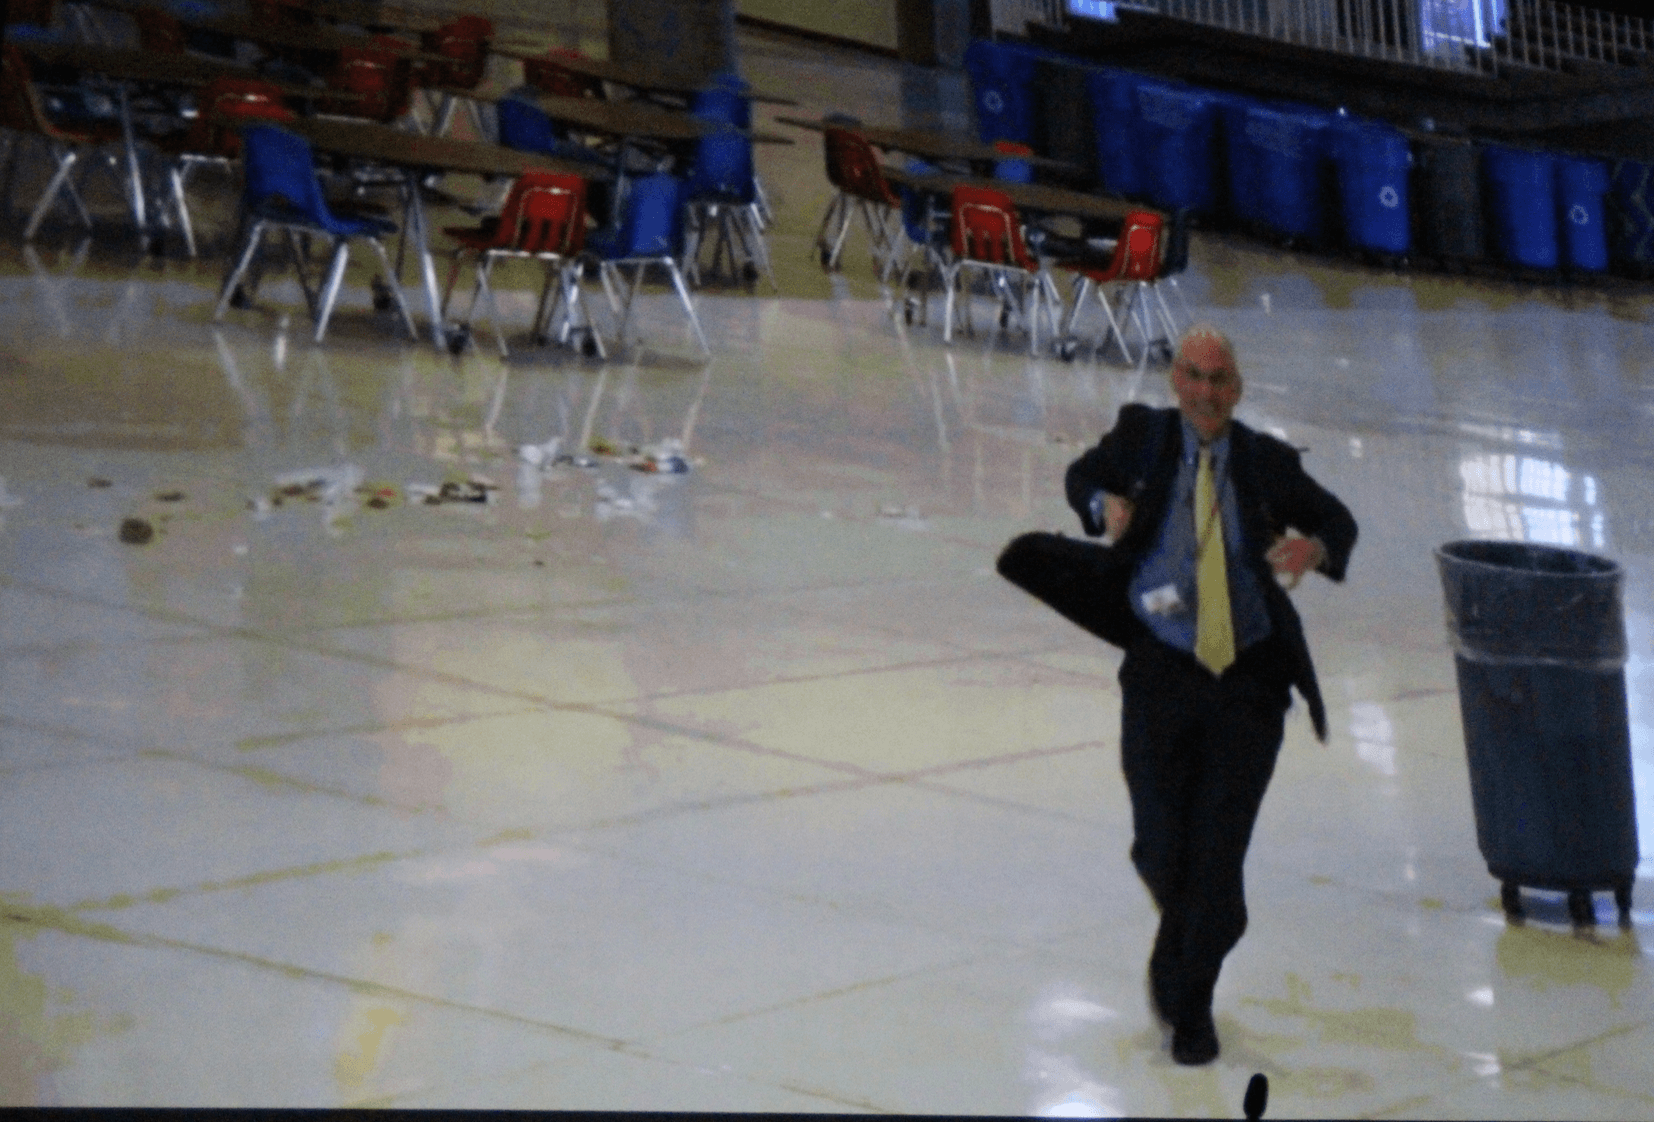 Dr. Winters sprints through the student center in a video during SRO. March 9, 2018